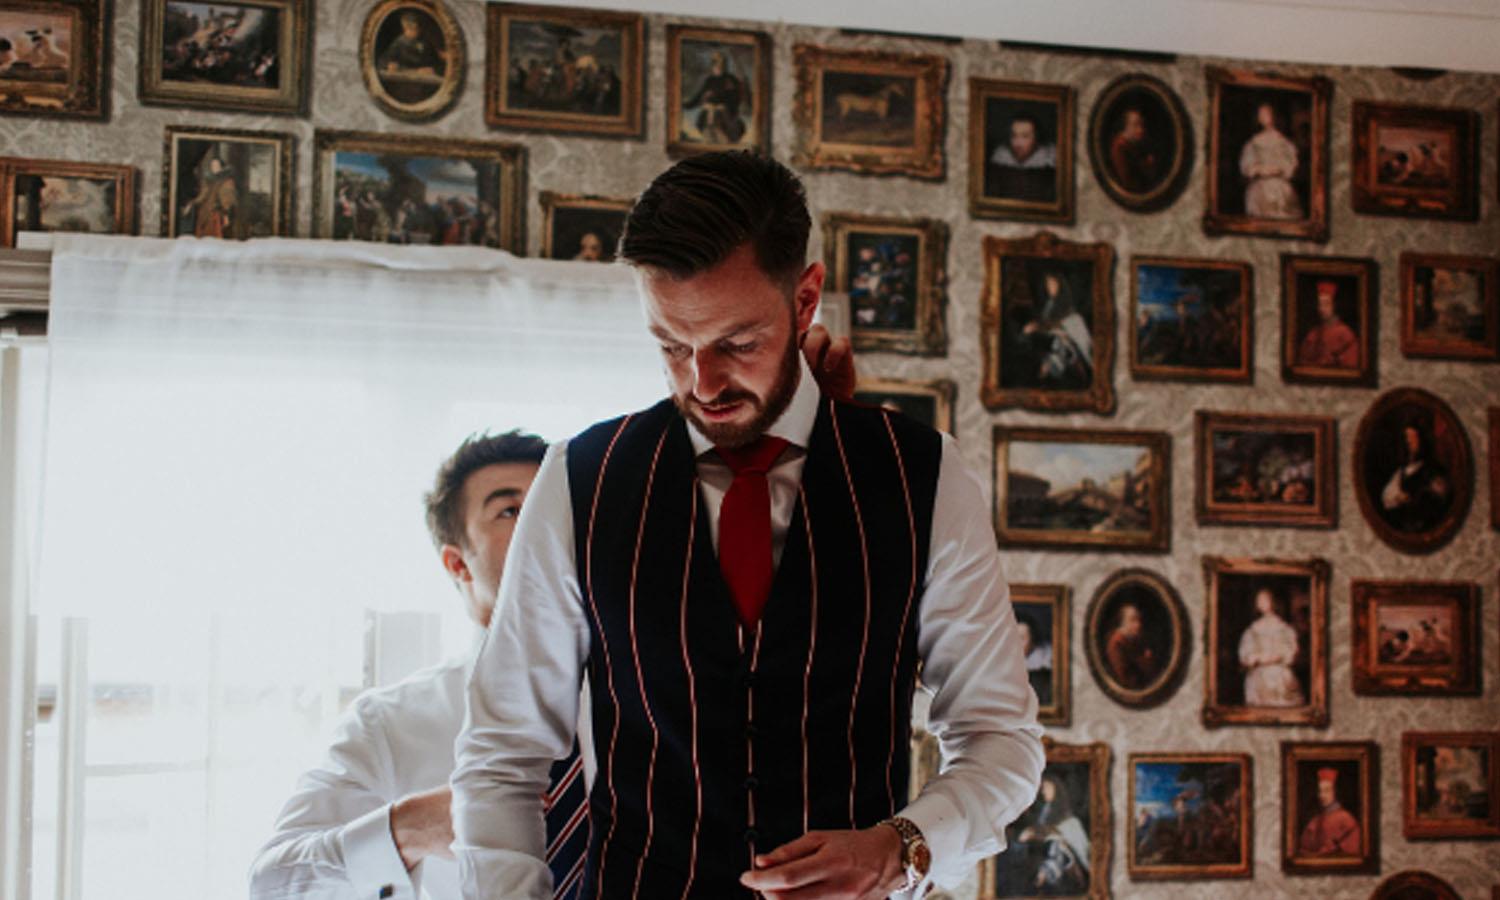 Groom dressing ready for the wedding ceremony. Photo Credit: Oxana Mazur Photography